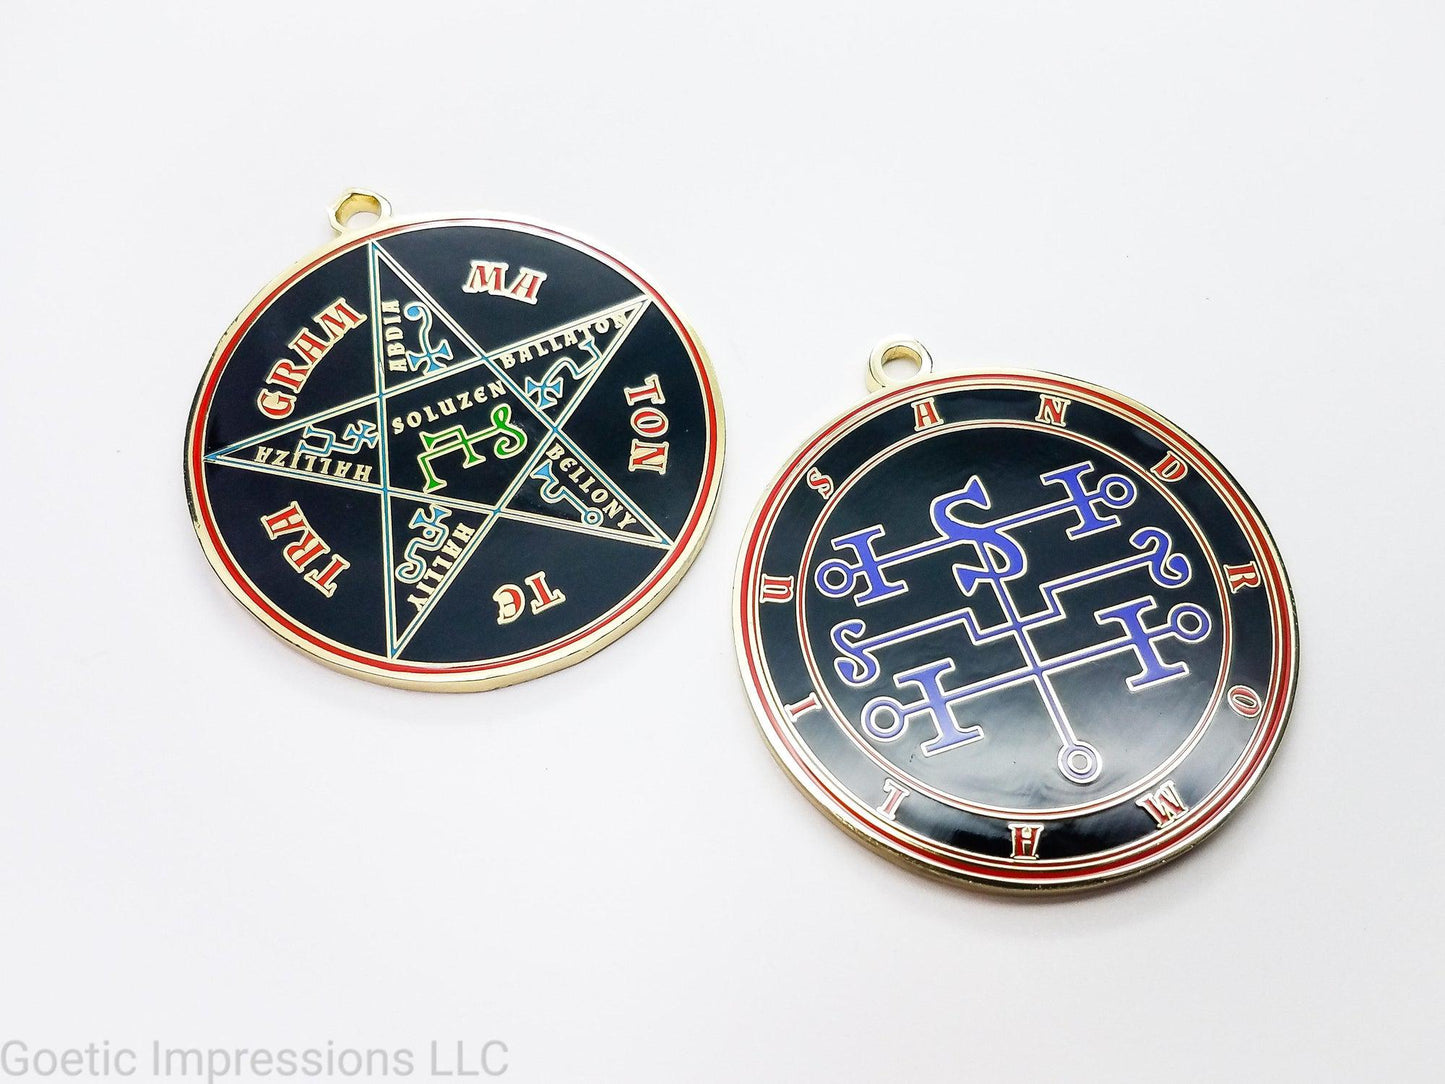 Andromalius sigil medallion with pentacle of solomon on reverse side